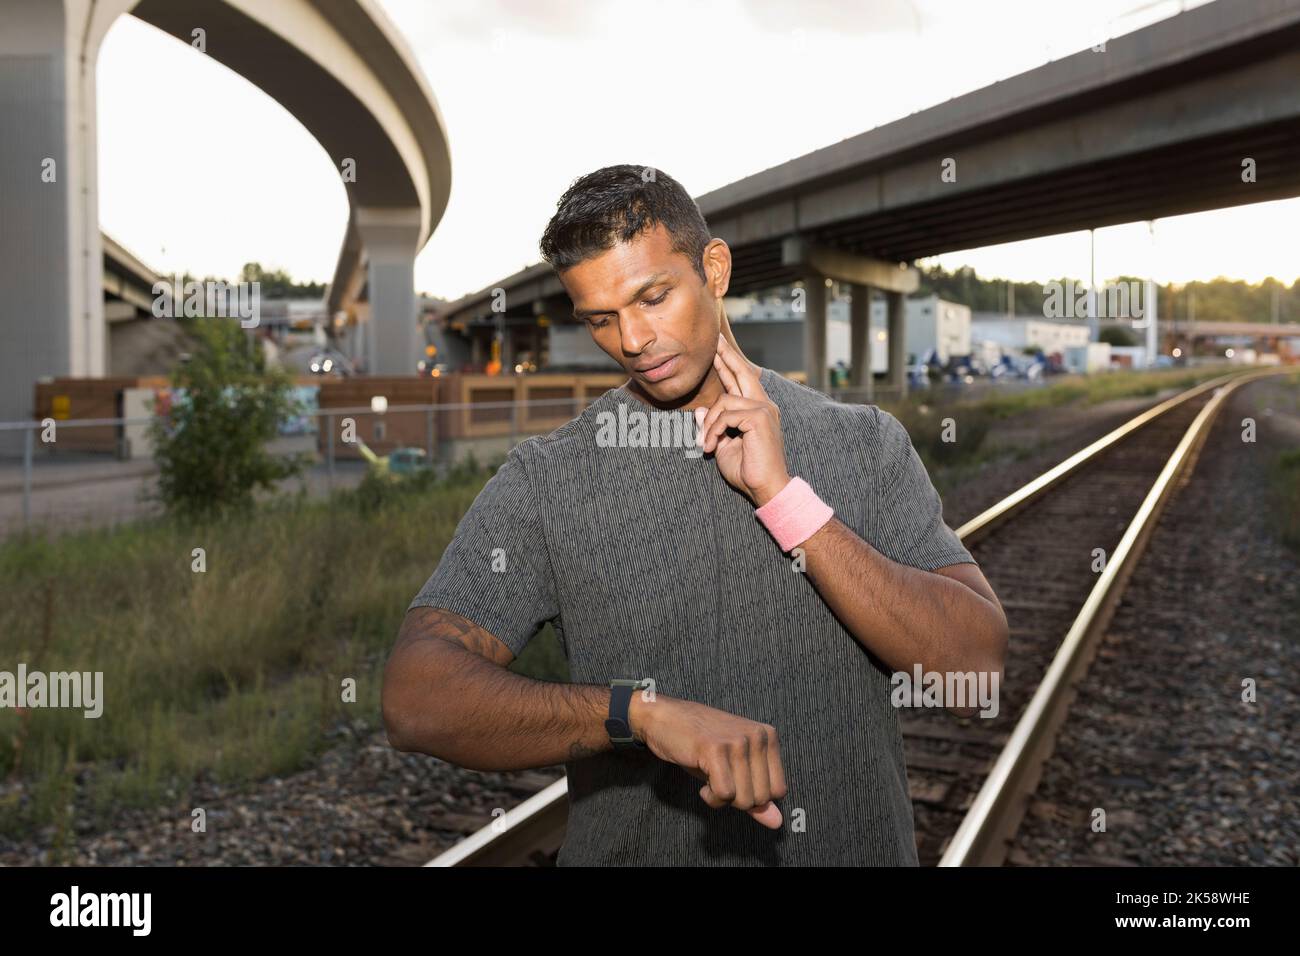 Mid adult man checking pulse and looking at sports watch Stock Photo